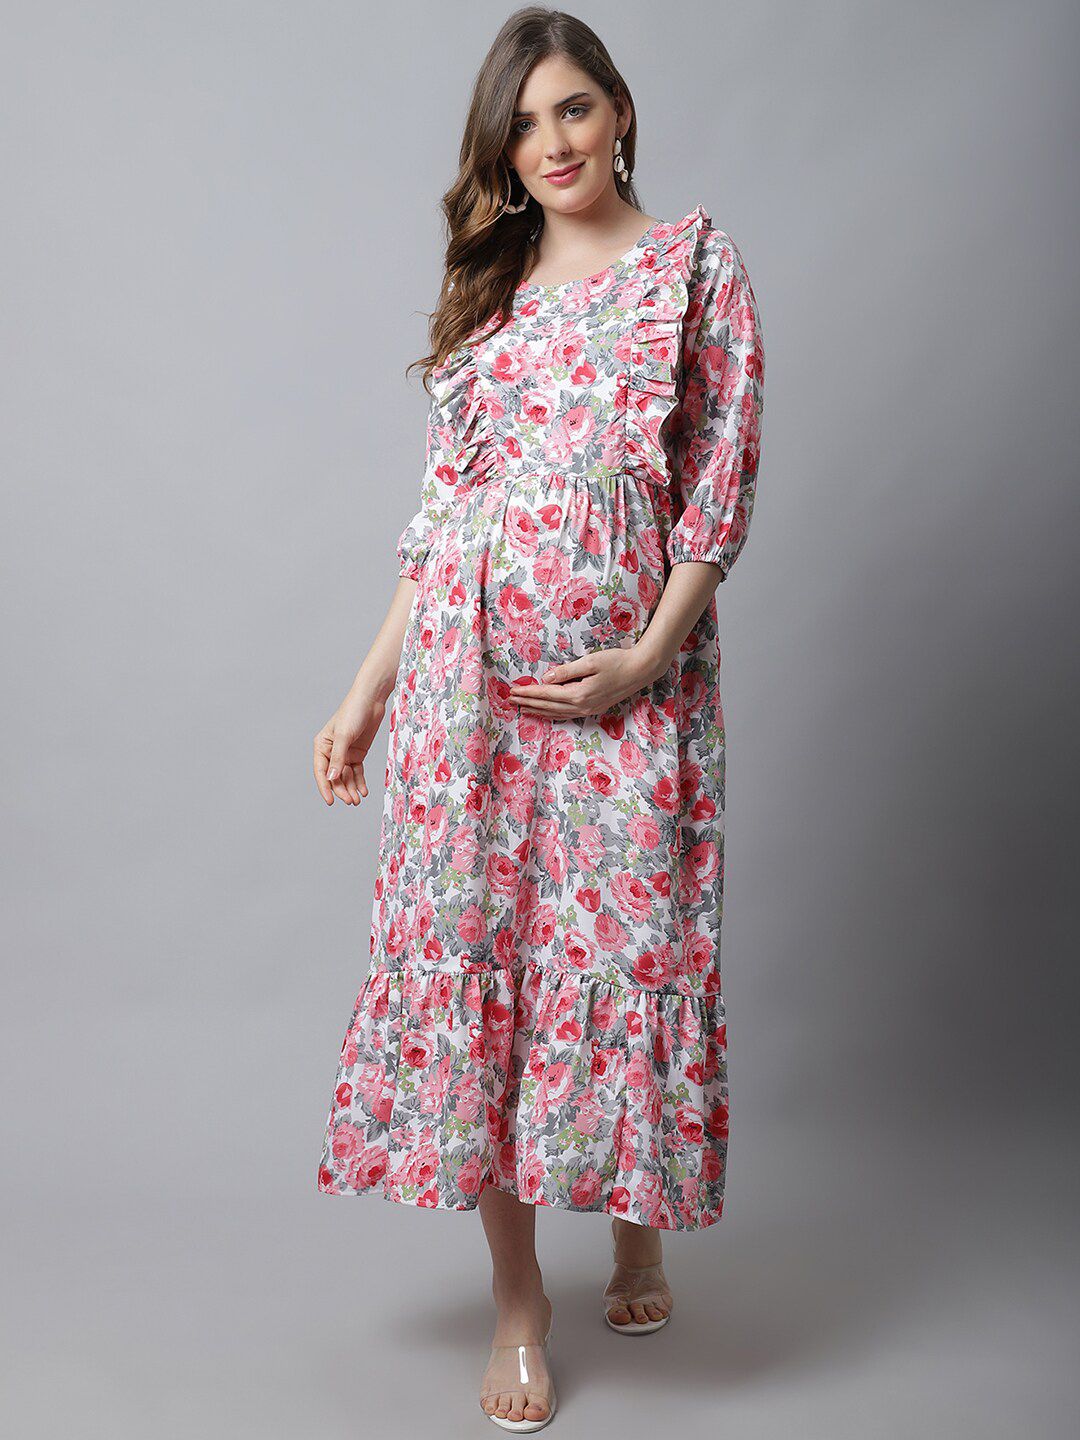 Frempy Pink Floral Crepe Maternity A-Line Midi Dress Price in India